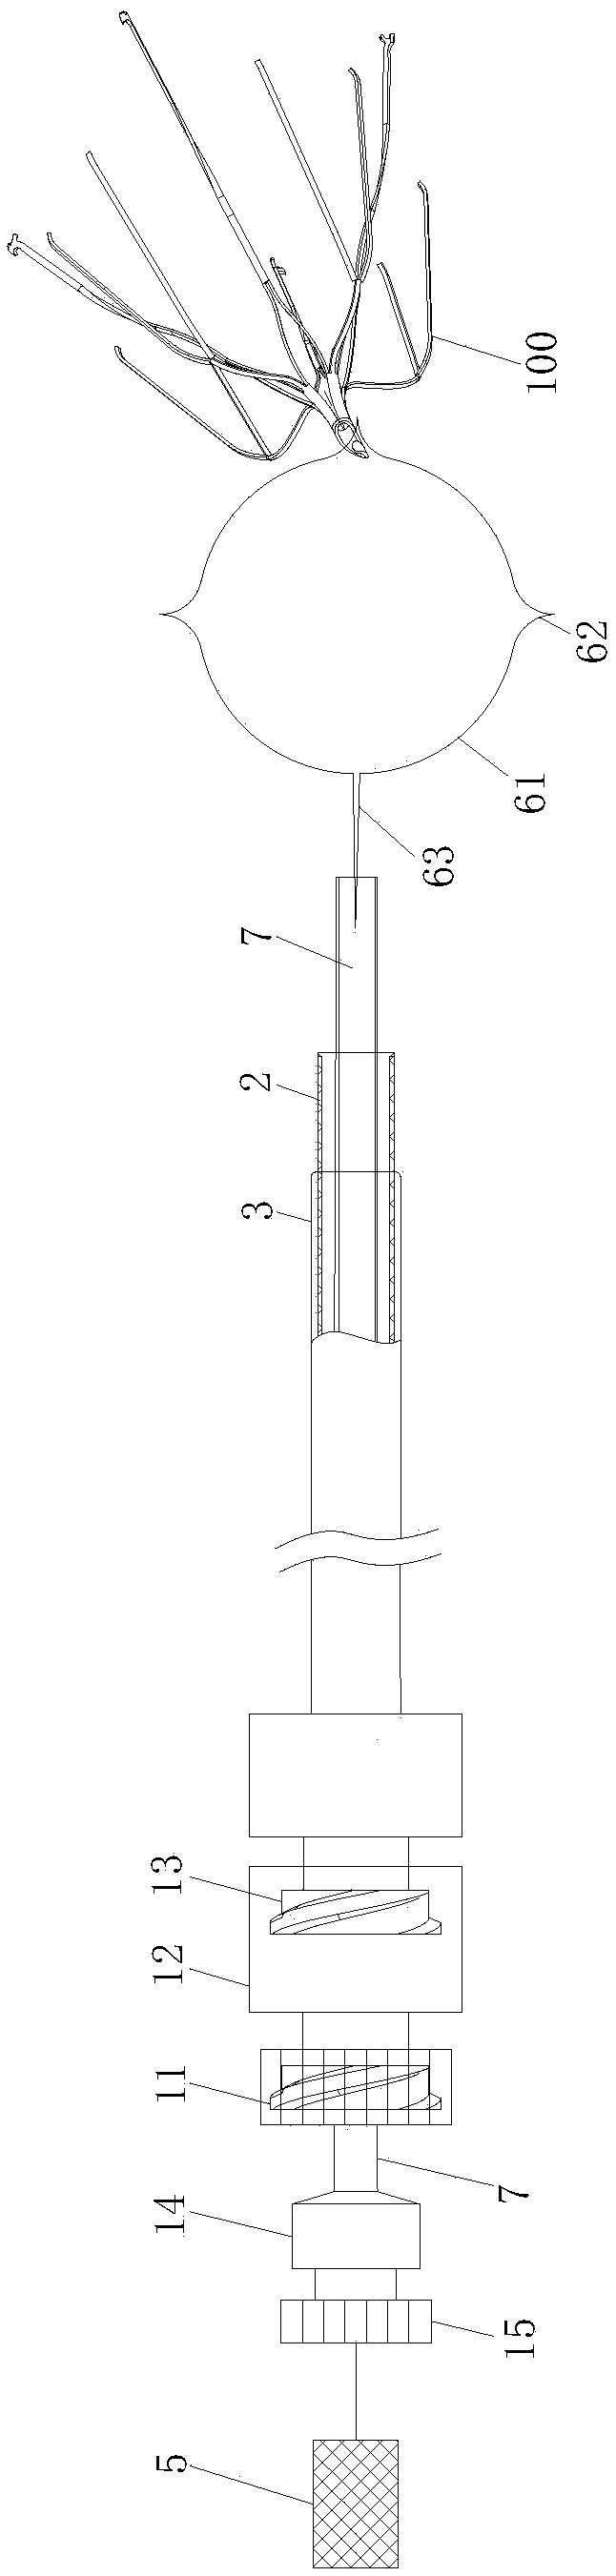 Inferior vena cava filter recovery device and method